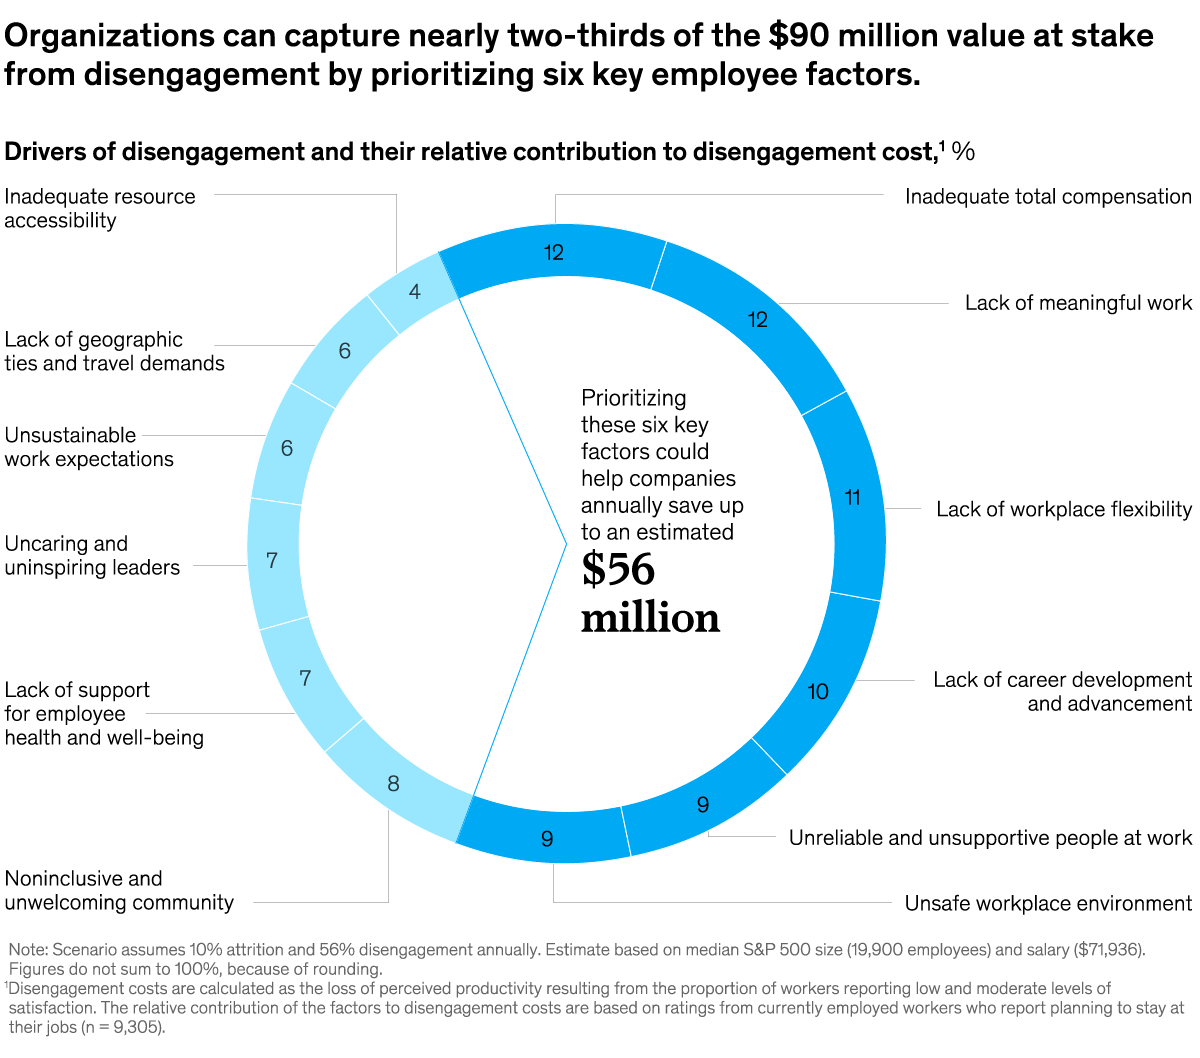 A chart titled “Organizations can capture nearly two-thirds of the $90 millions value at stake from disengagement by prioritizing six key employee factors.” Click to open the full article on McKinsey.com.